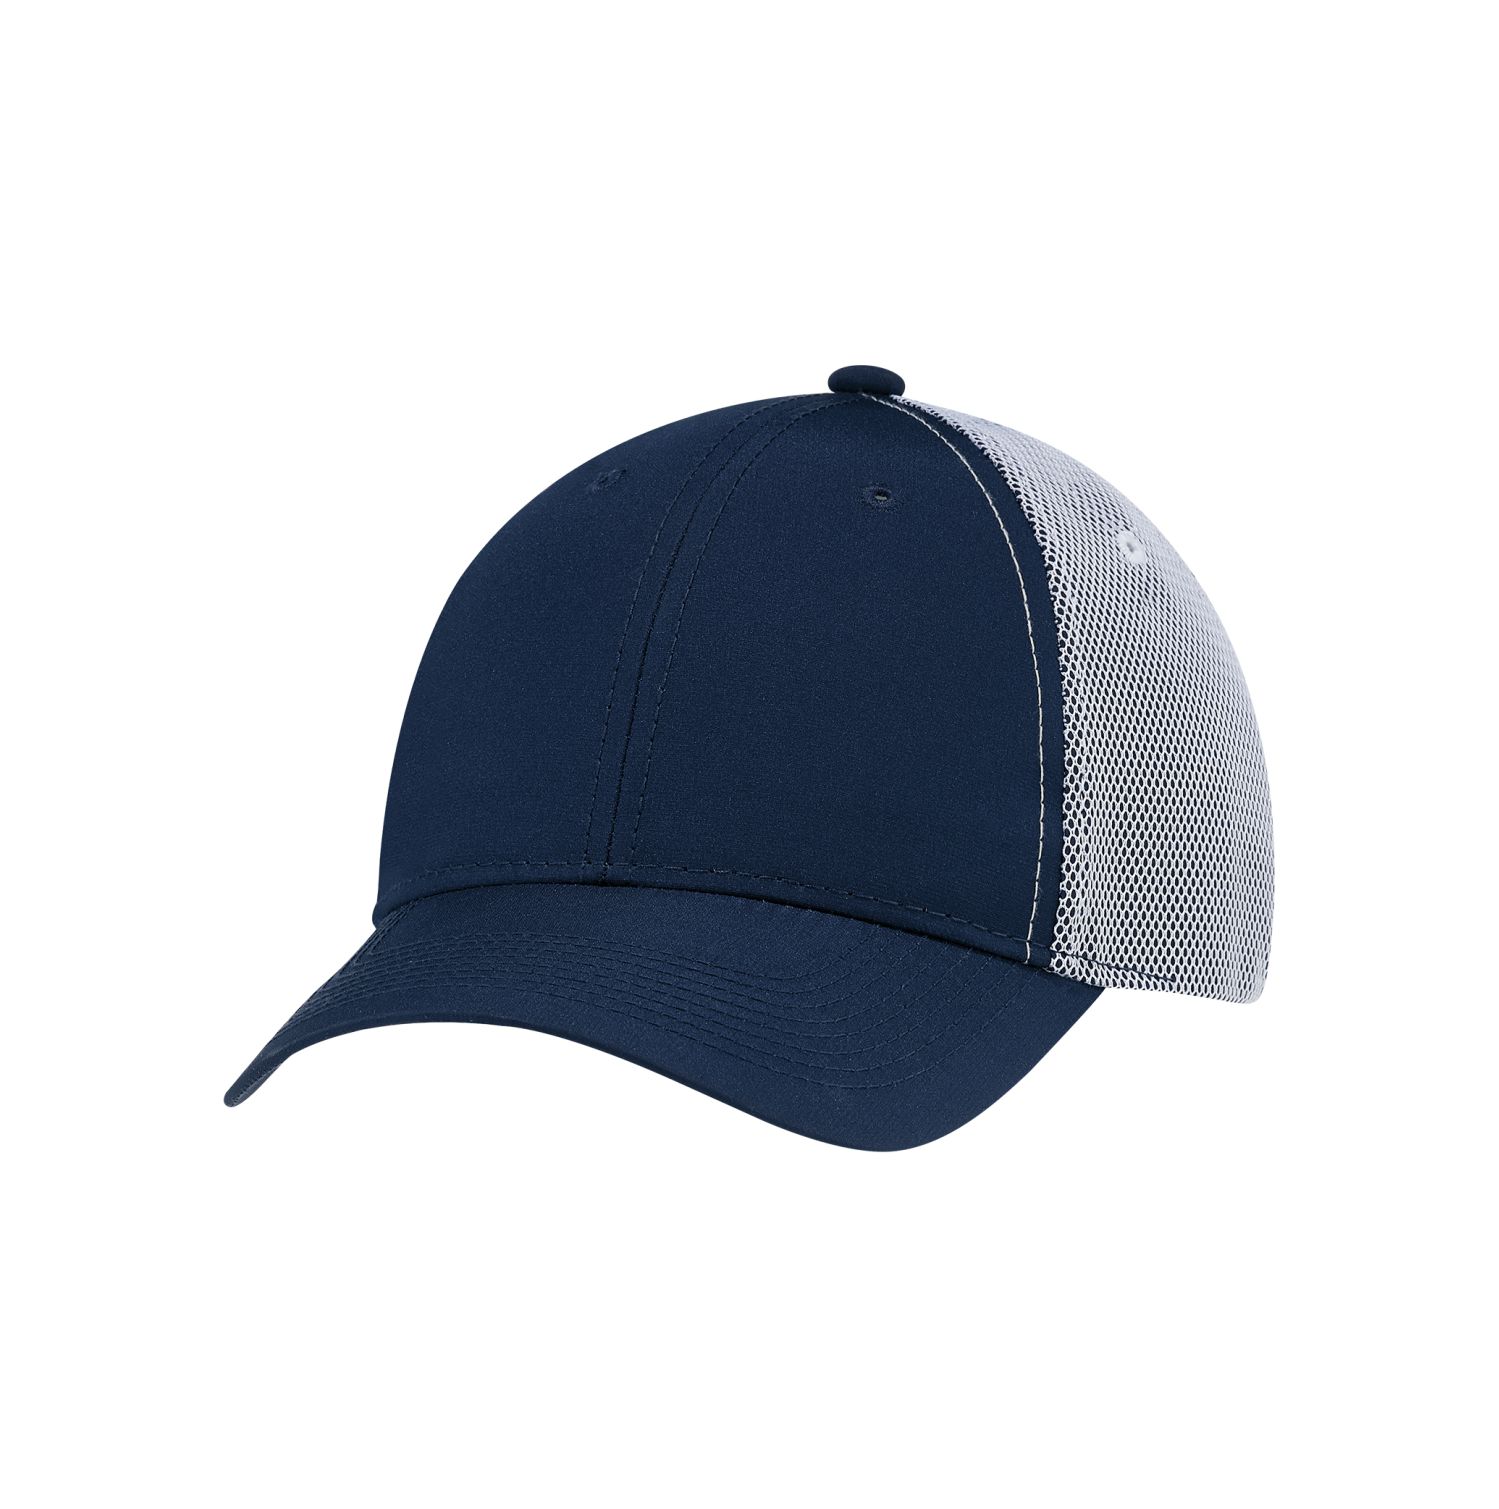 AJM Polyester Rip Stop / Polyester Rip Stop Bonded Mesh 6 Panel Constructed Full-Fit Hat #1B637M Navy / White